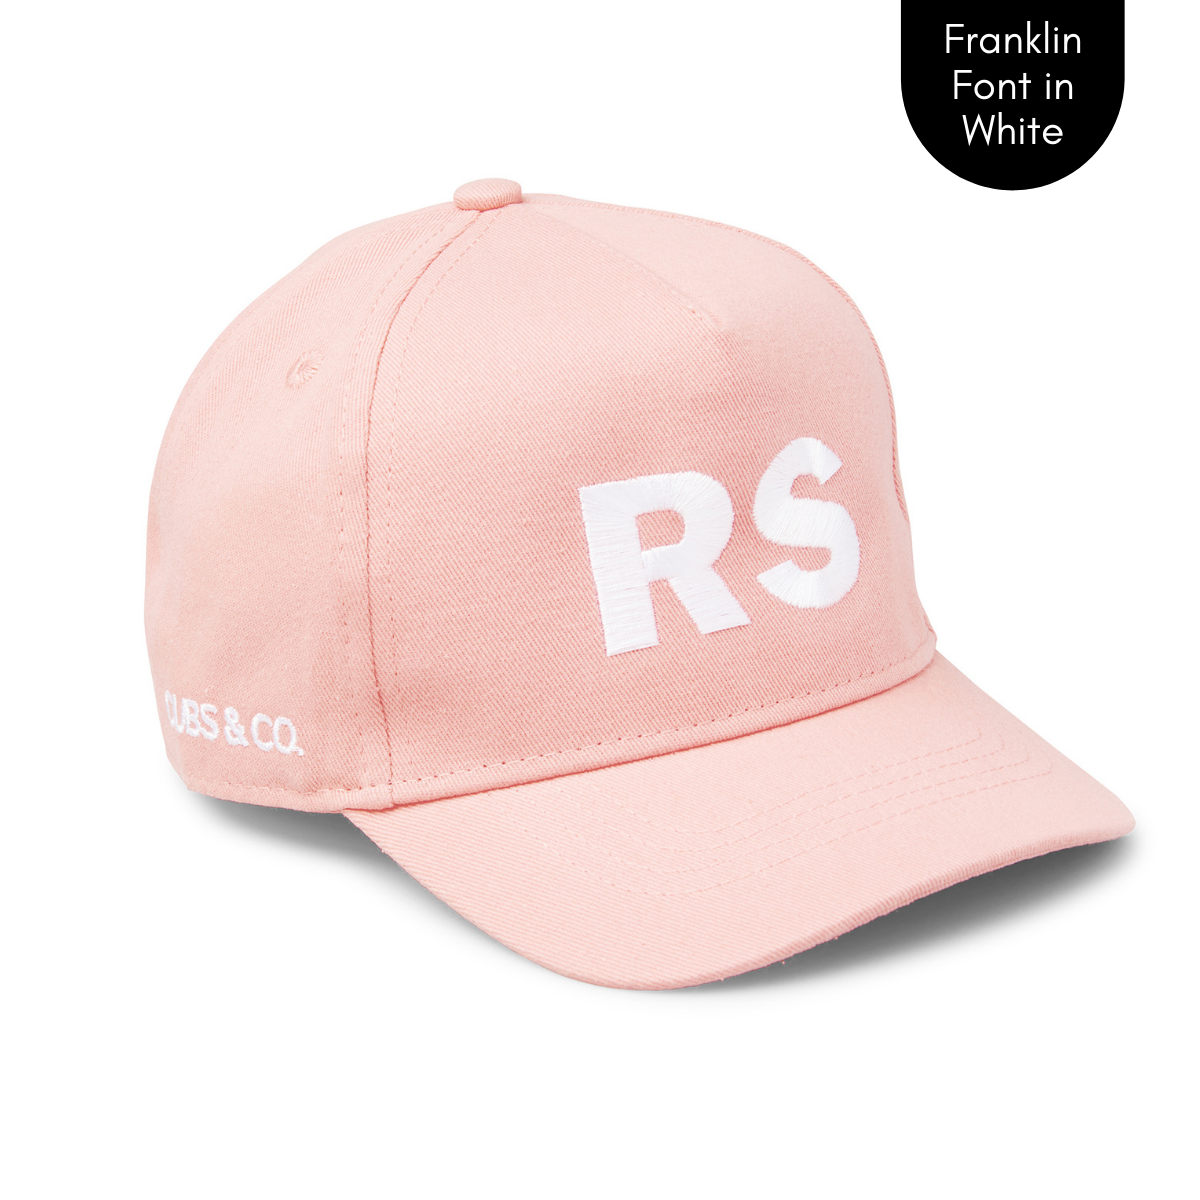 Personalised pink baseball cap with your initials for babies, toddlers, kids, women and men, Cubs & Co. Australia.